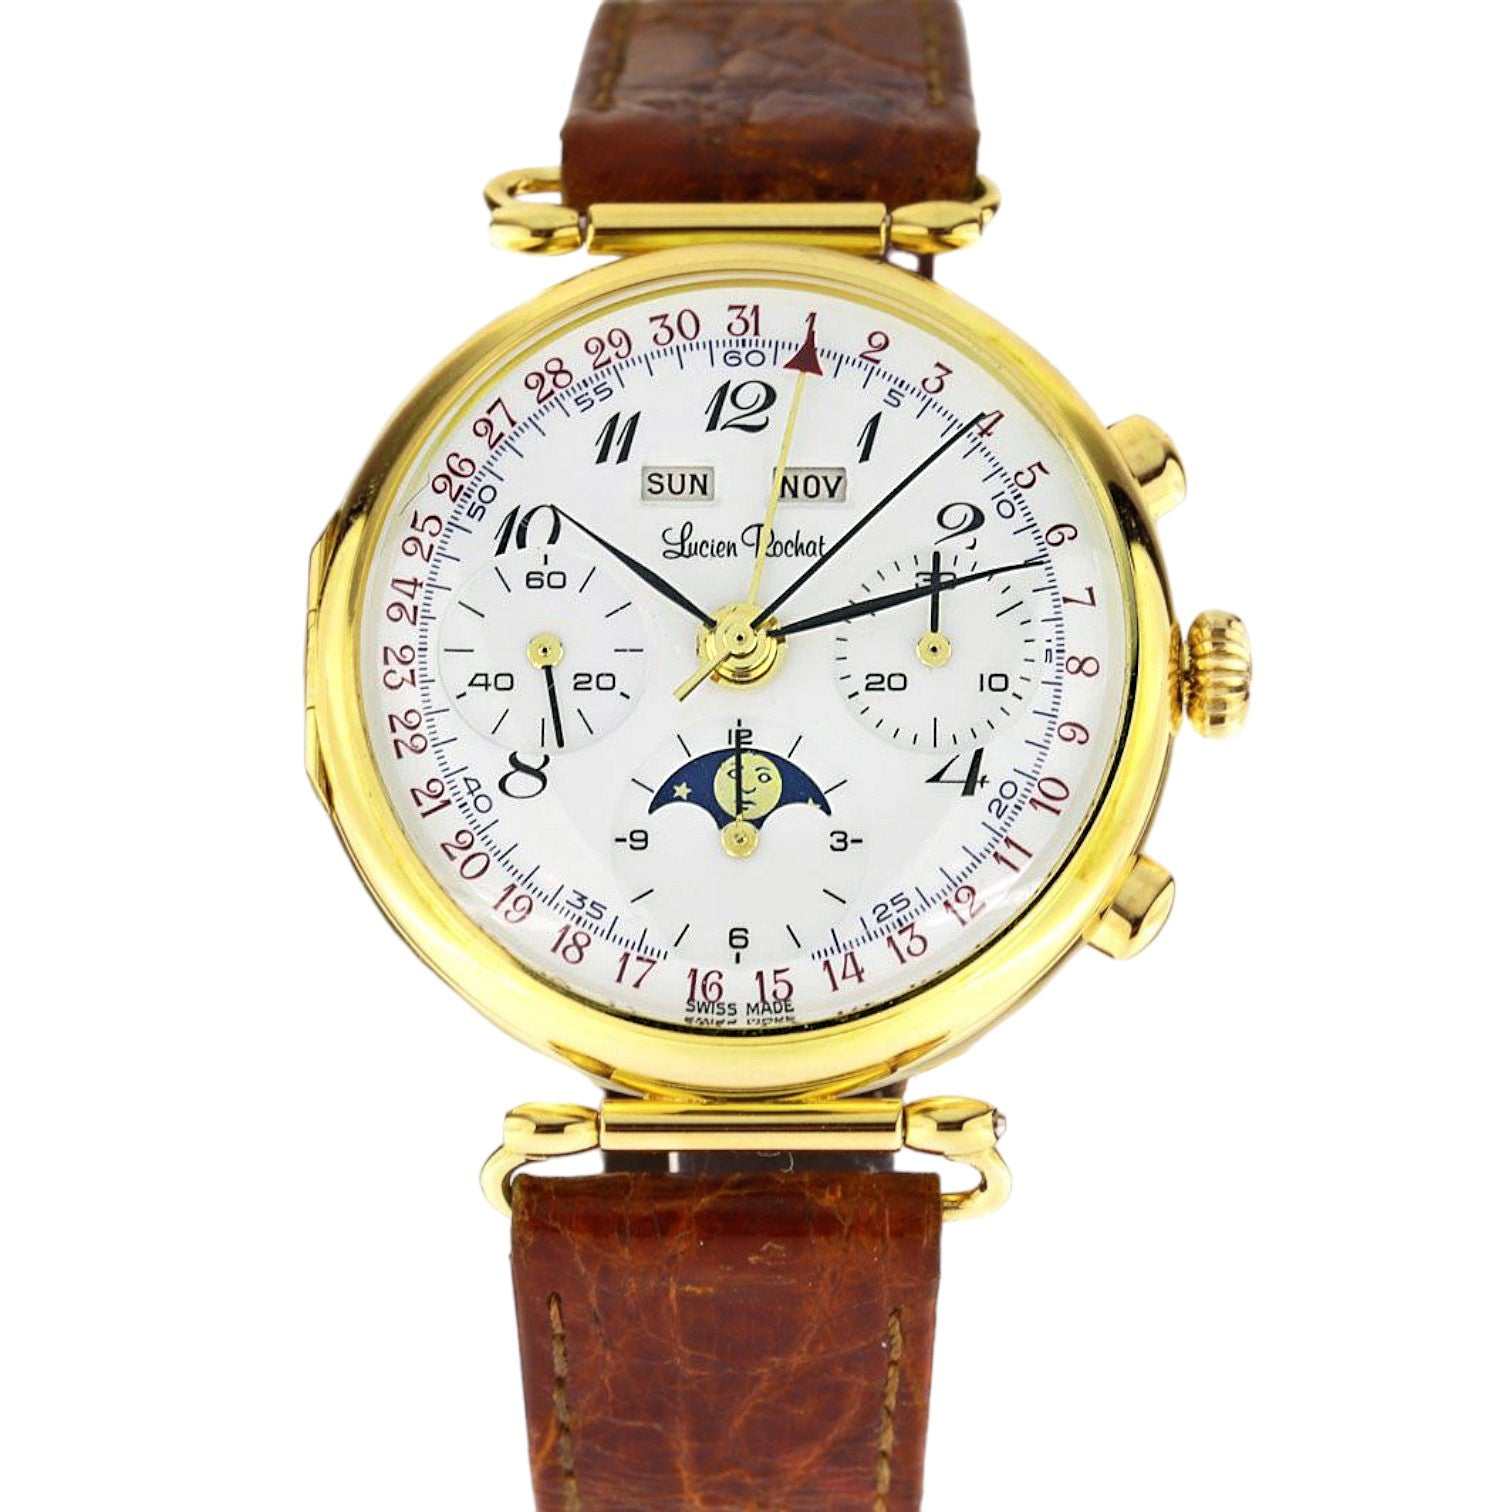 Lucien Rochat Chronograph Complete Calendar Moon Phases Gold 18 kt Ref. 1204 - ON6304